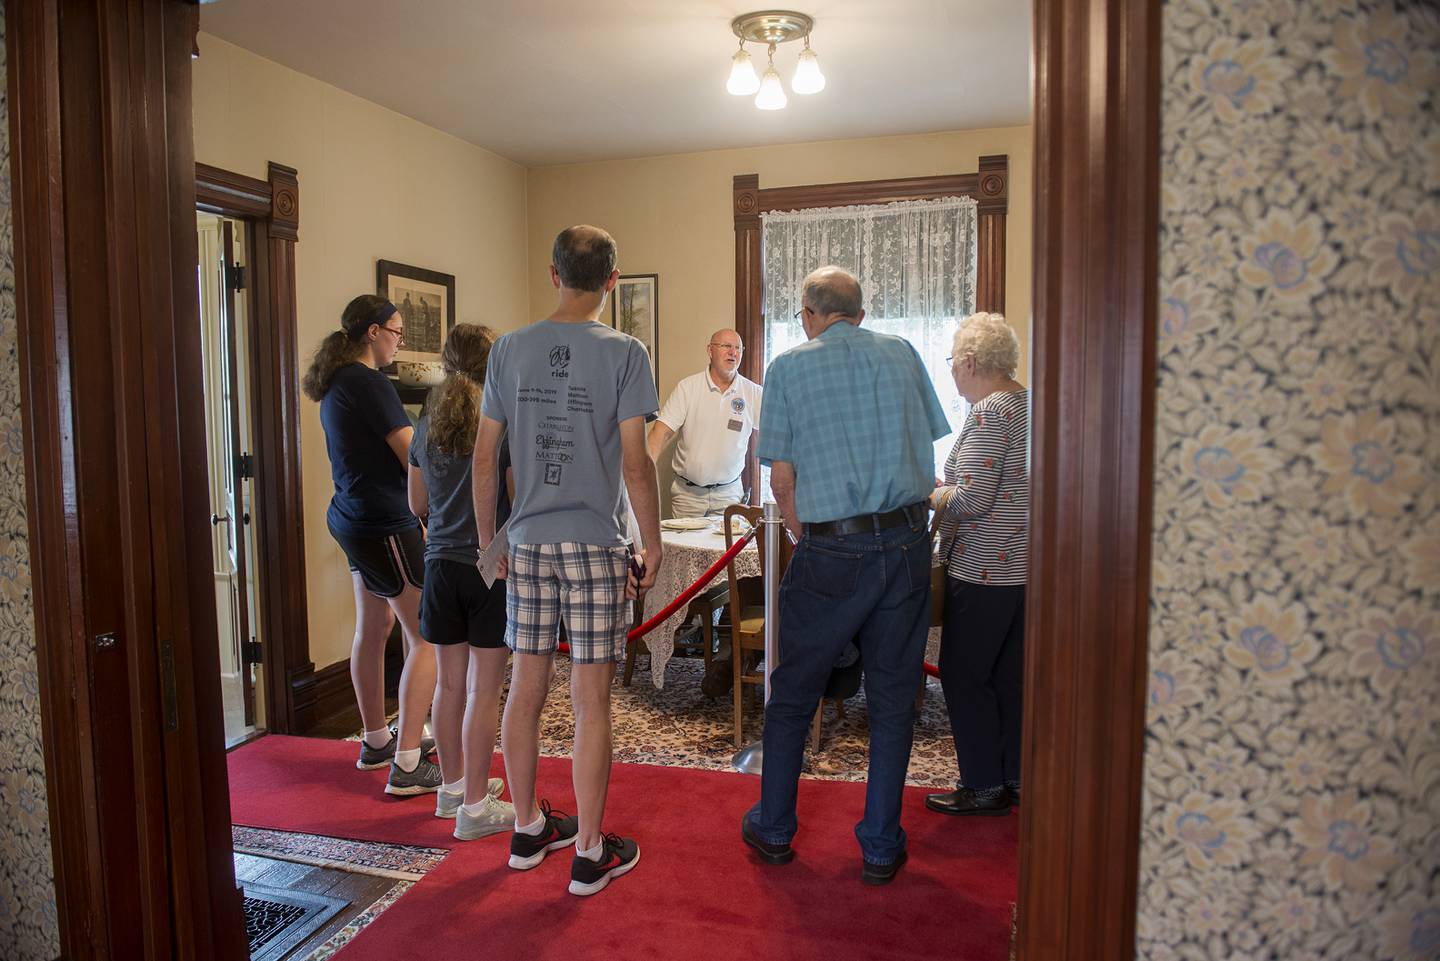 Assistant director Jerry Schnake leads a tour group through the home’s dining room Thursday, July 15, 2021.